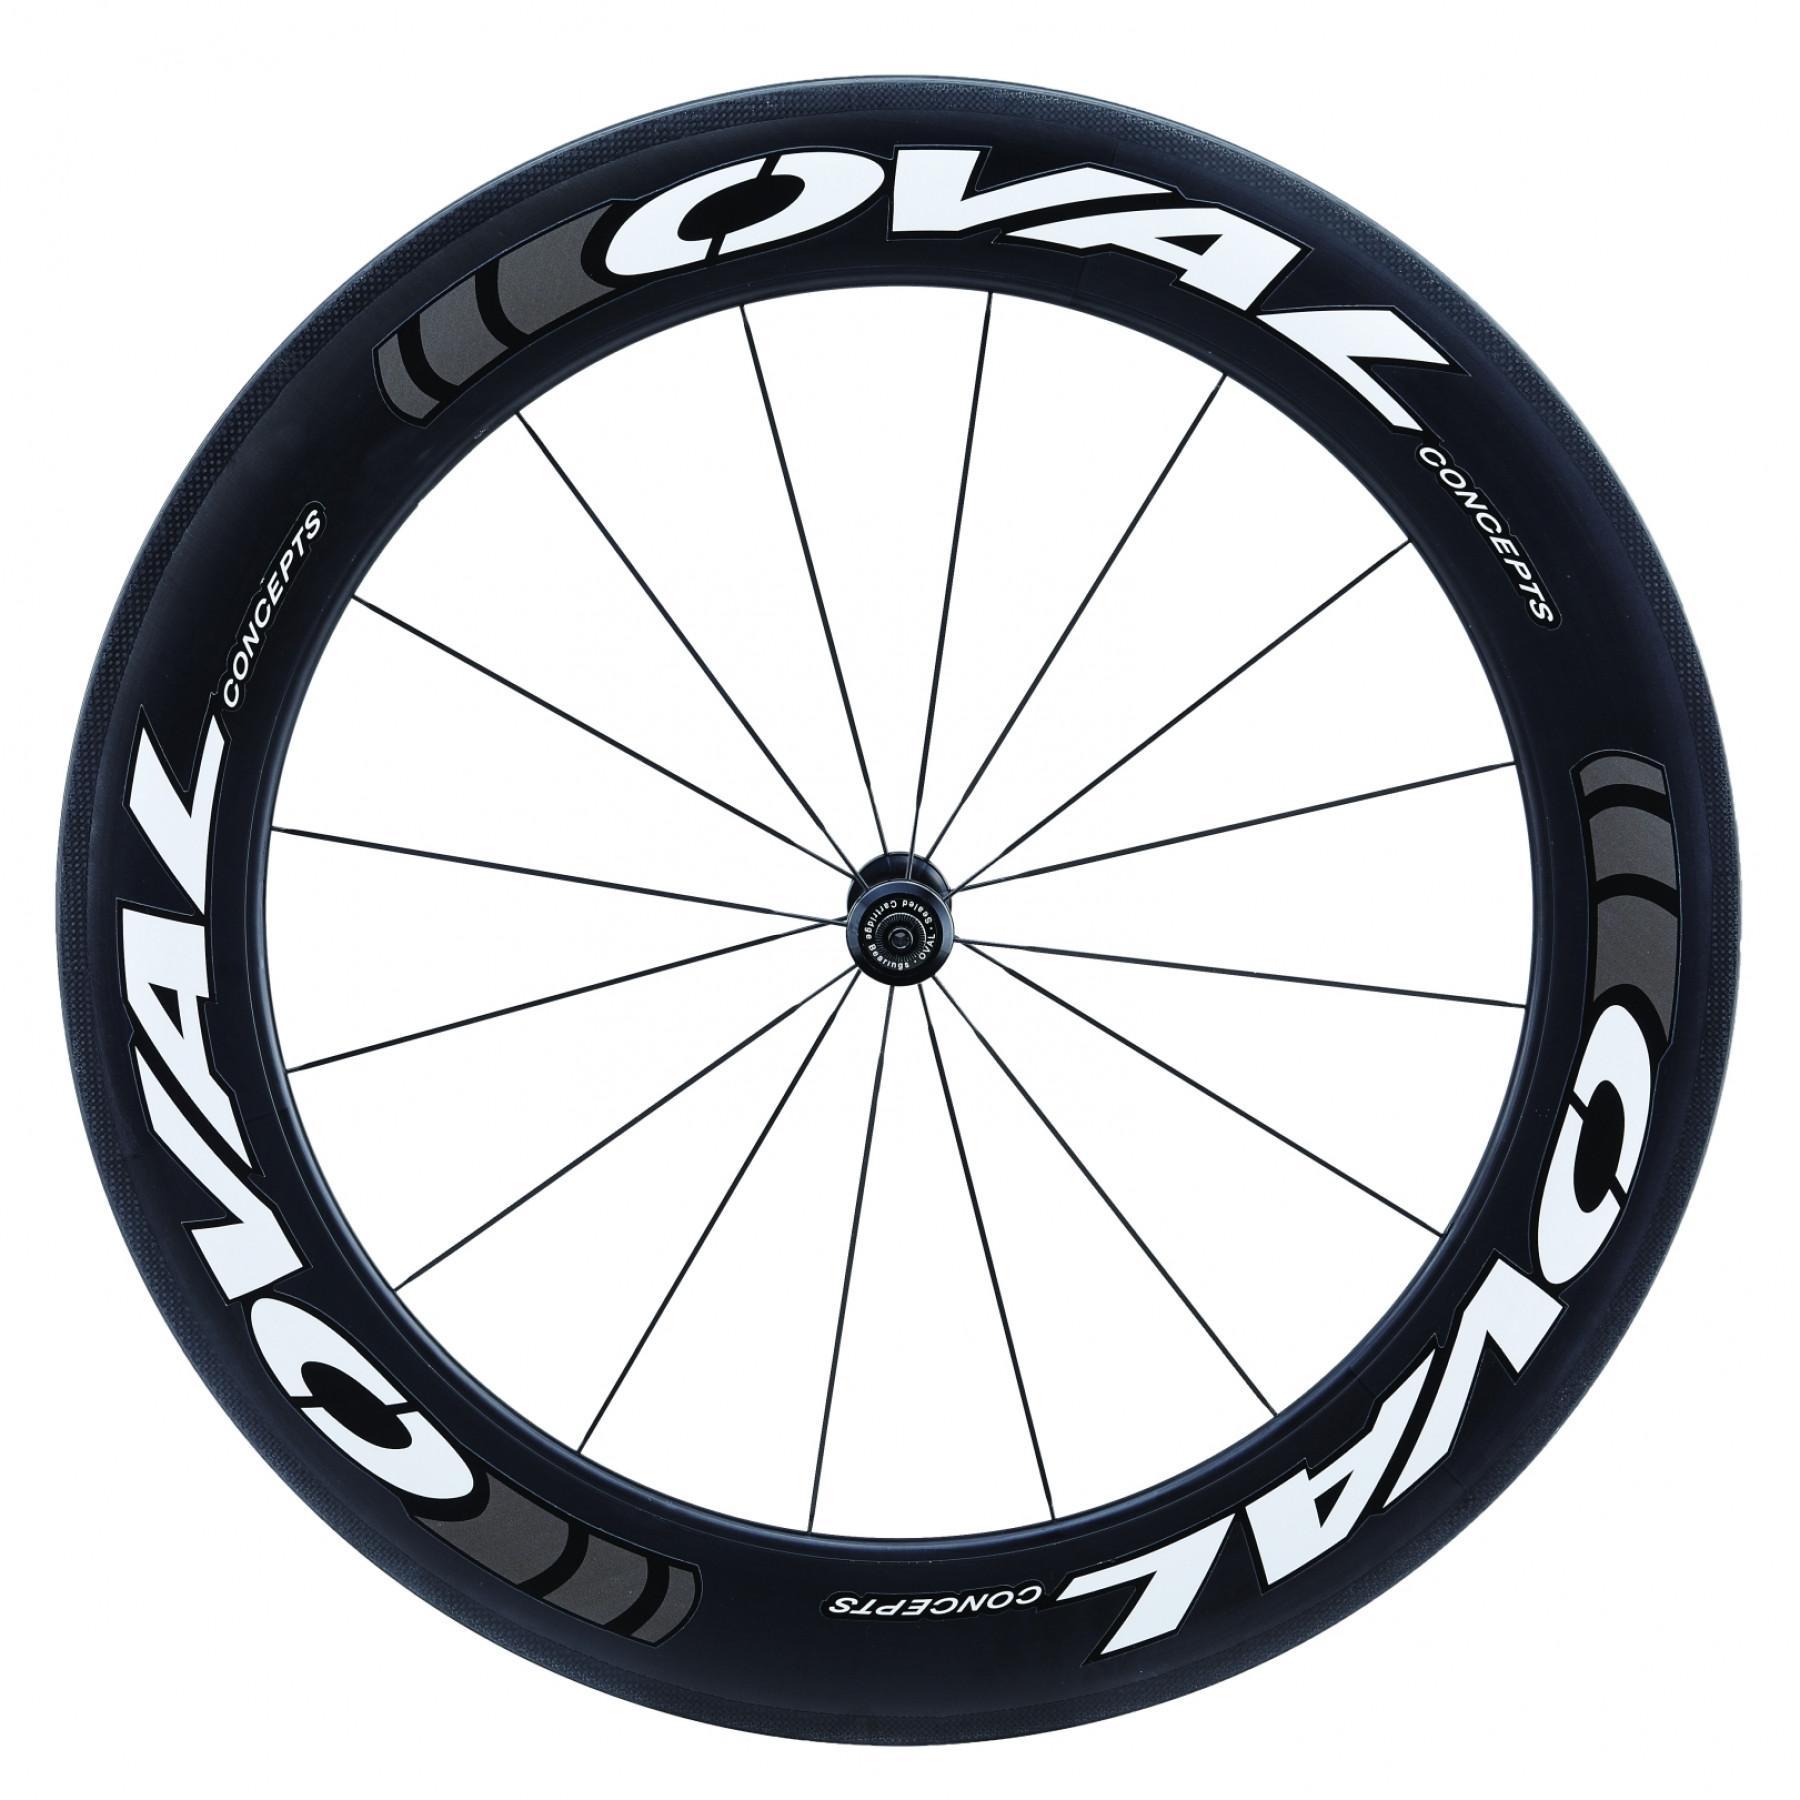 Felge Oval concepts Oval 980 Carbon Clincher 2017